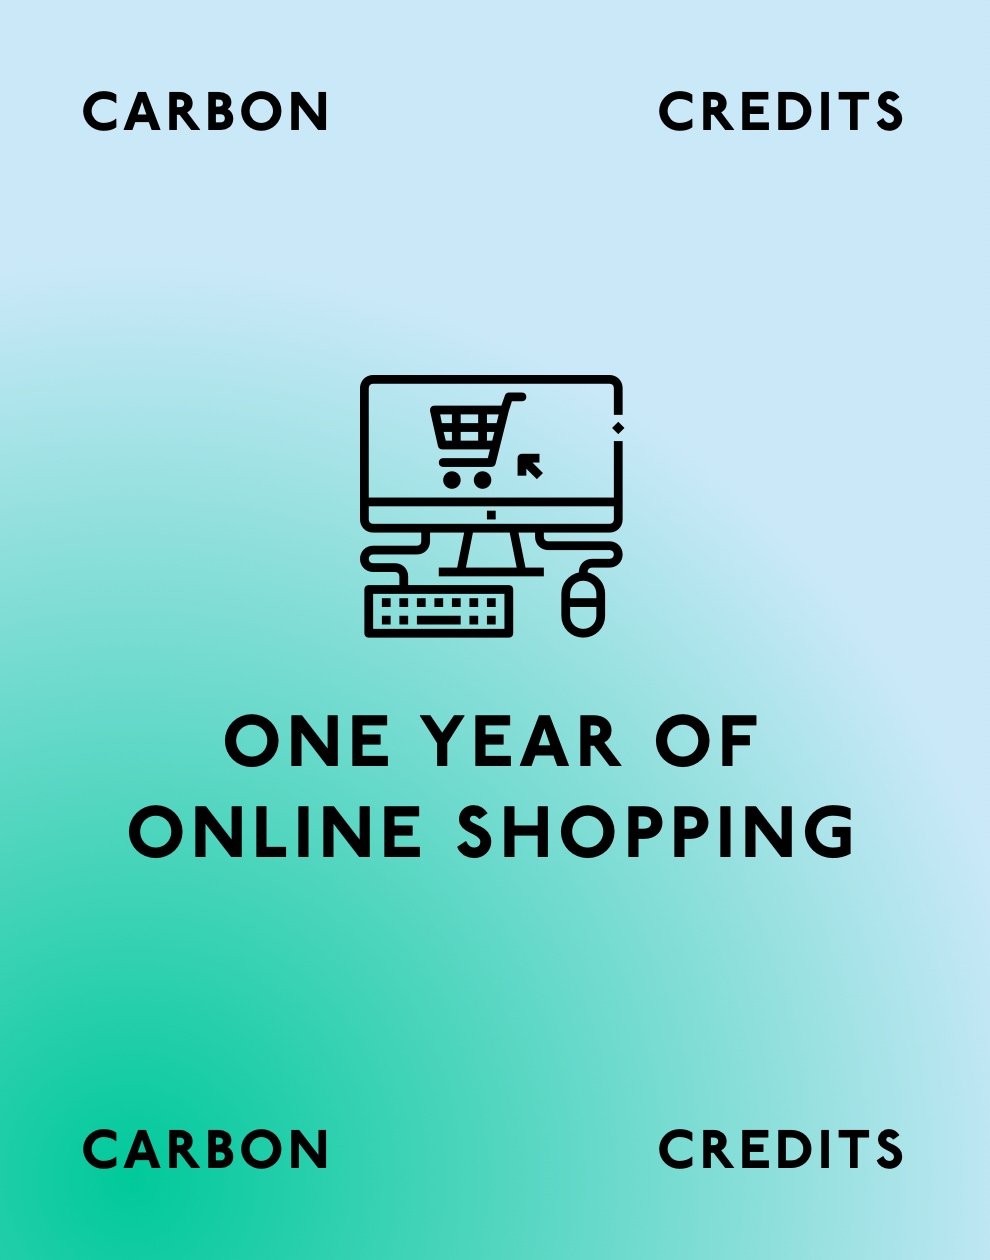 Carbon Credits for One Year of Online Shopping